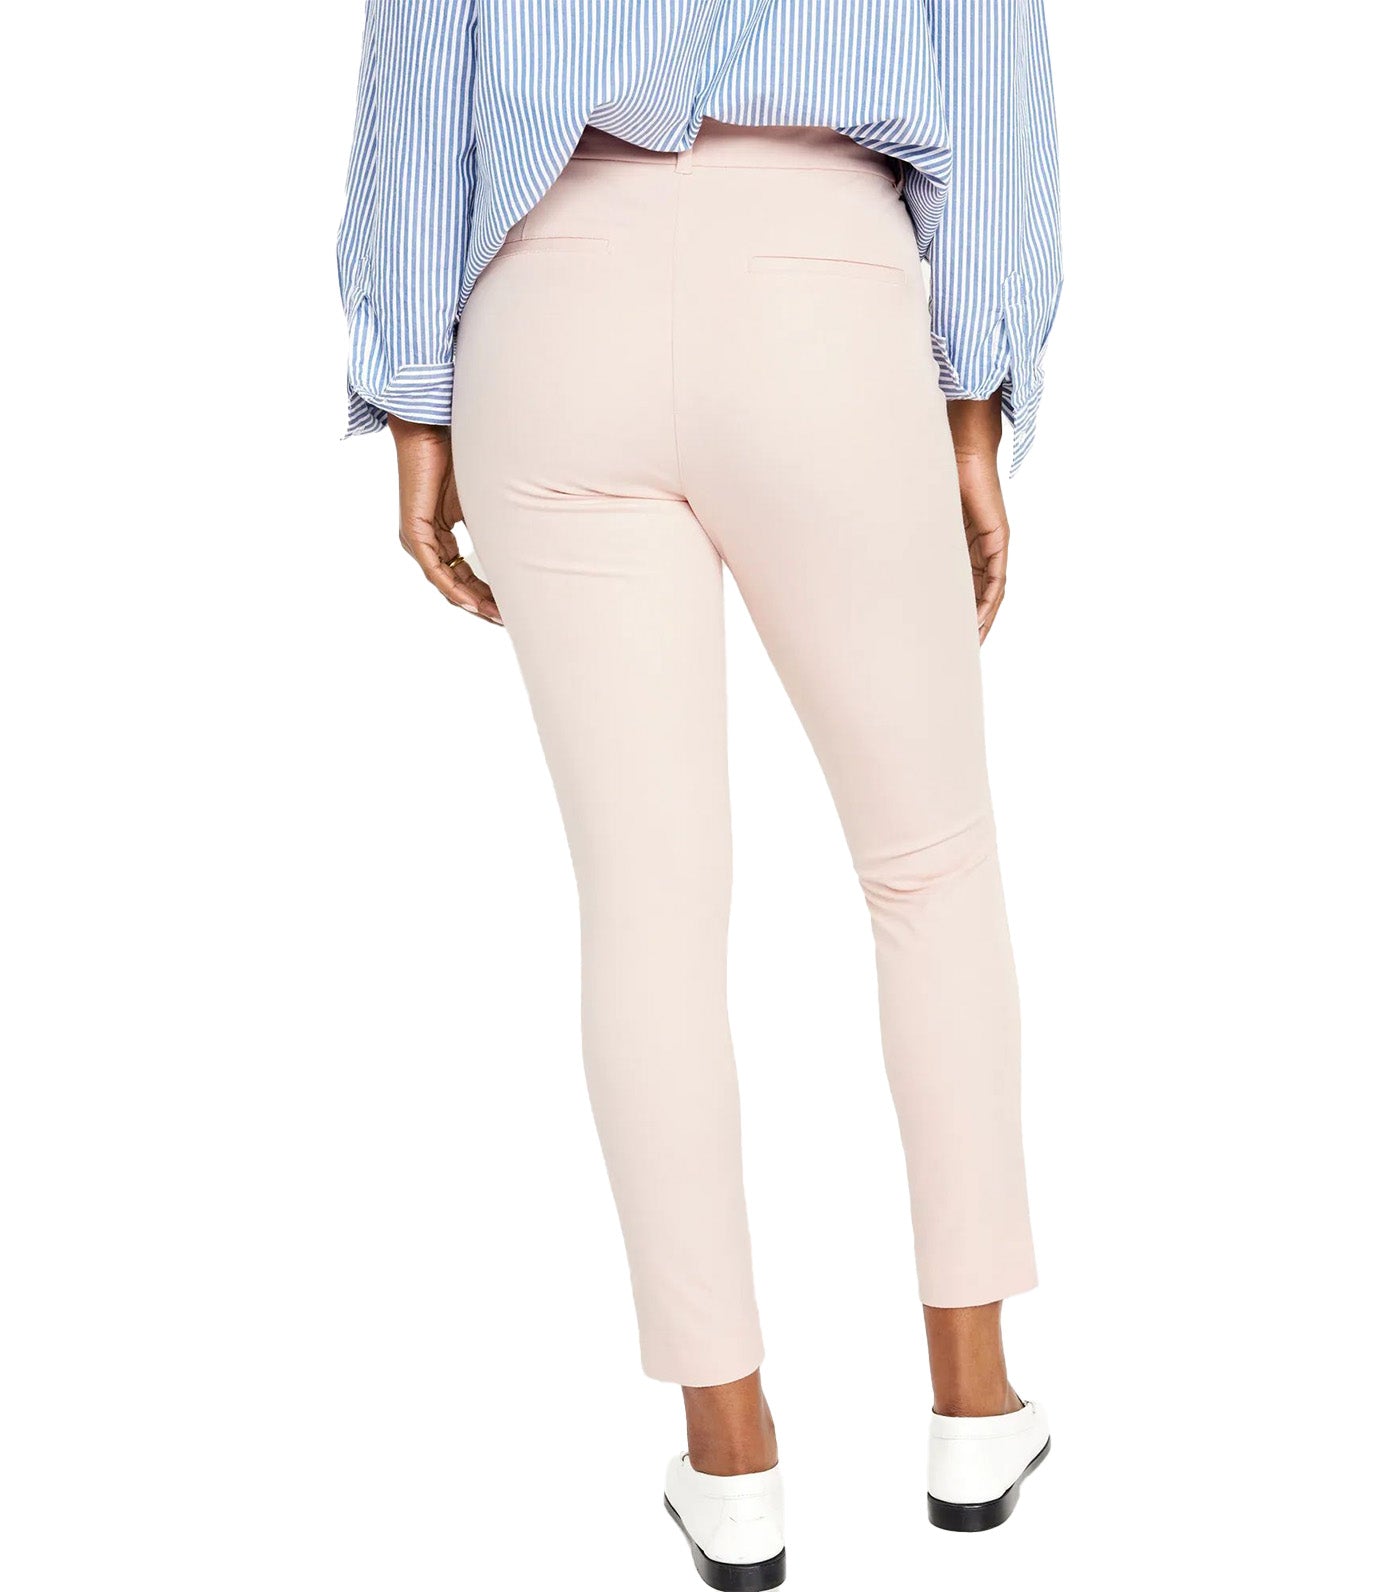 High-Waisted Pixie Skinny Ankle Pants for Women Pink Bamboo